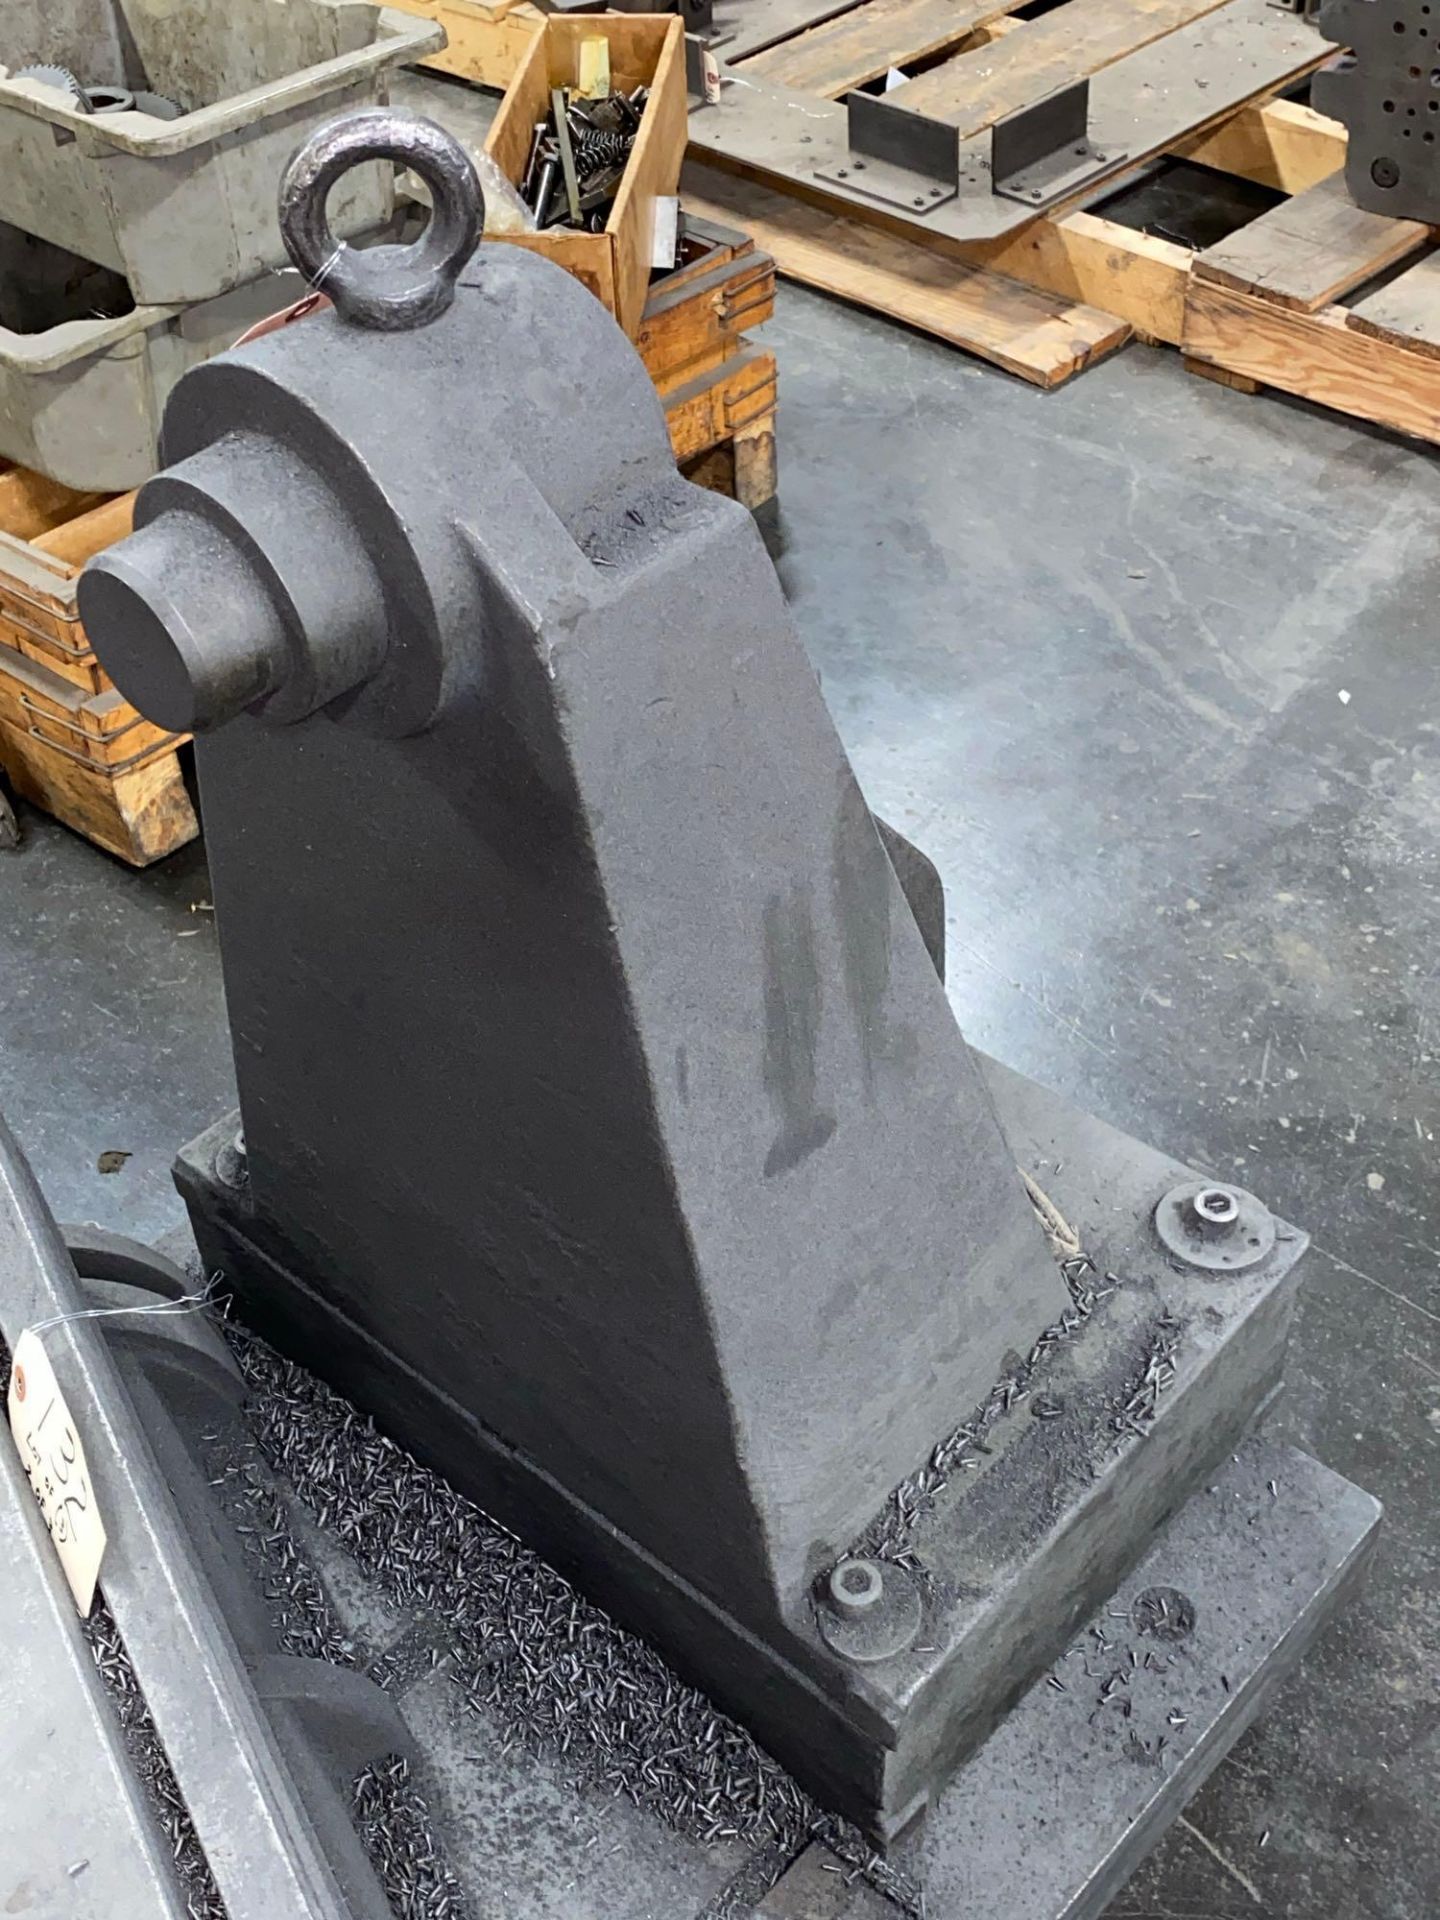 Cast Iron Spin Indexing Fixture w/ Tailstock Mounted on Base Plate - Image 4 of 7